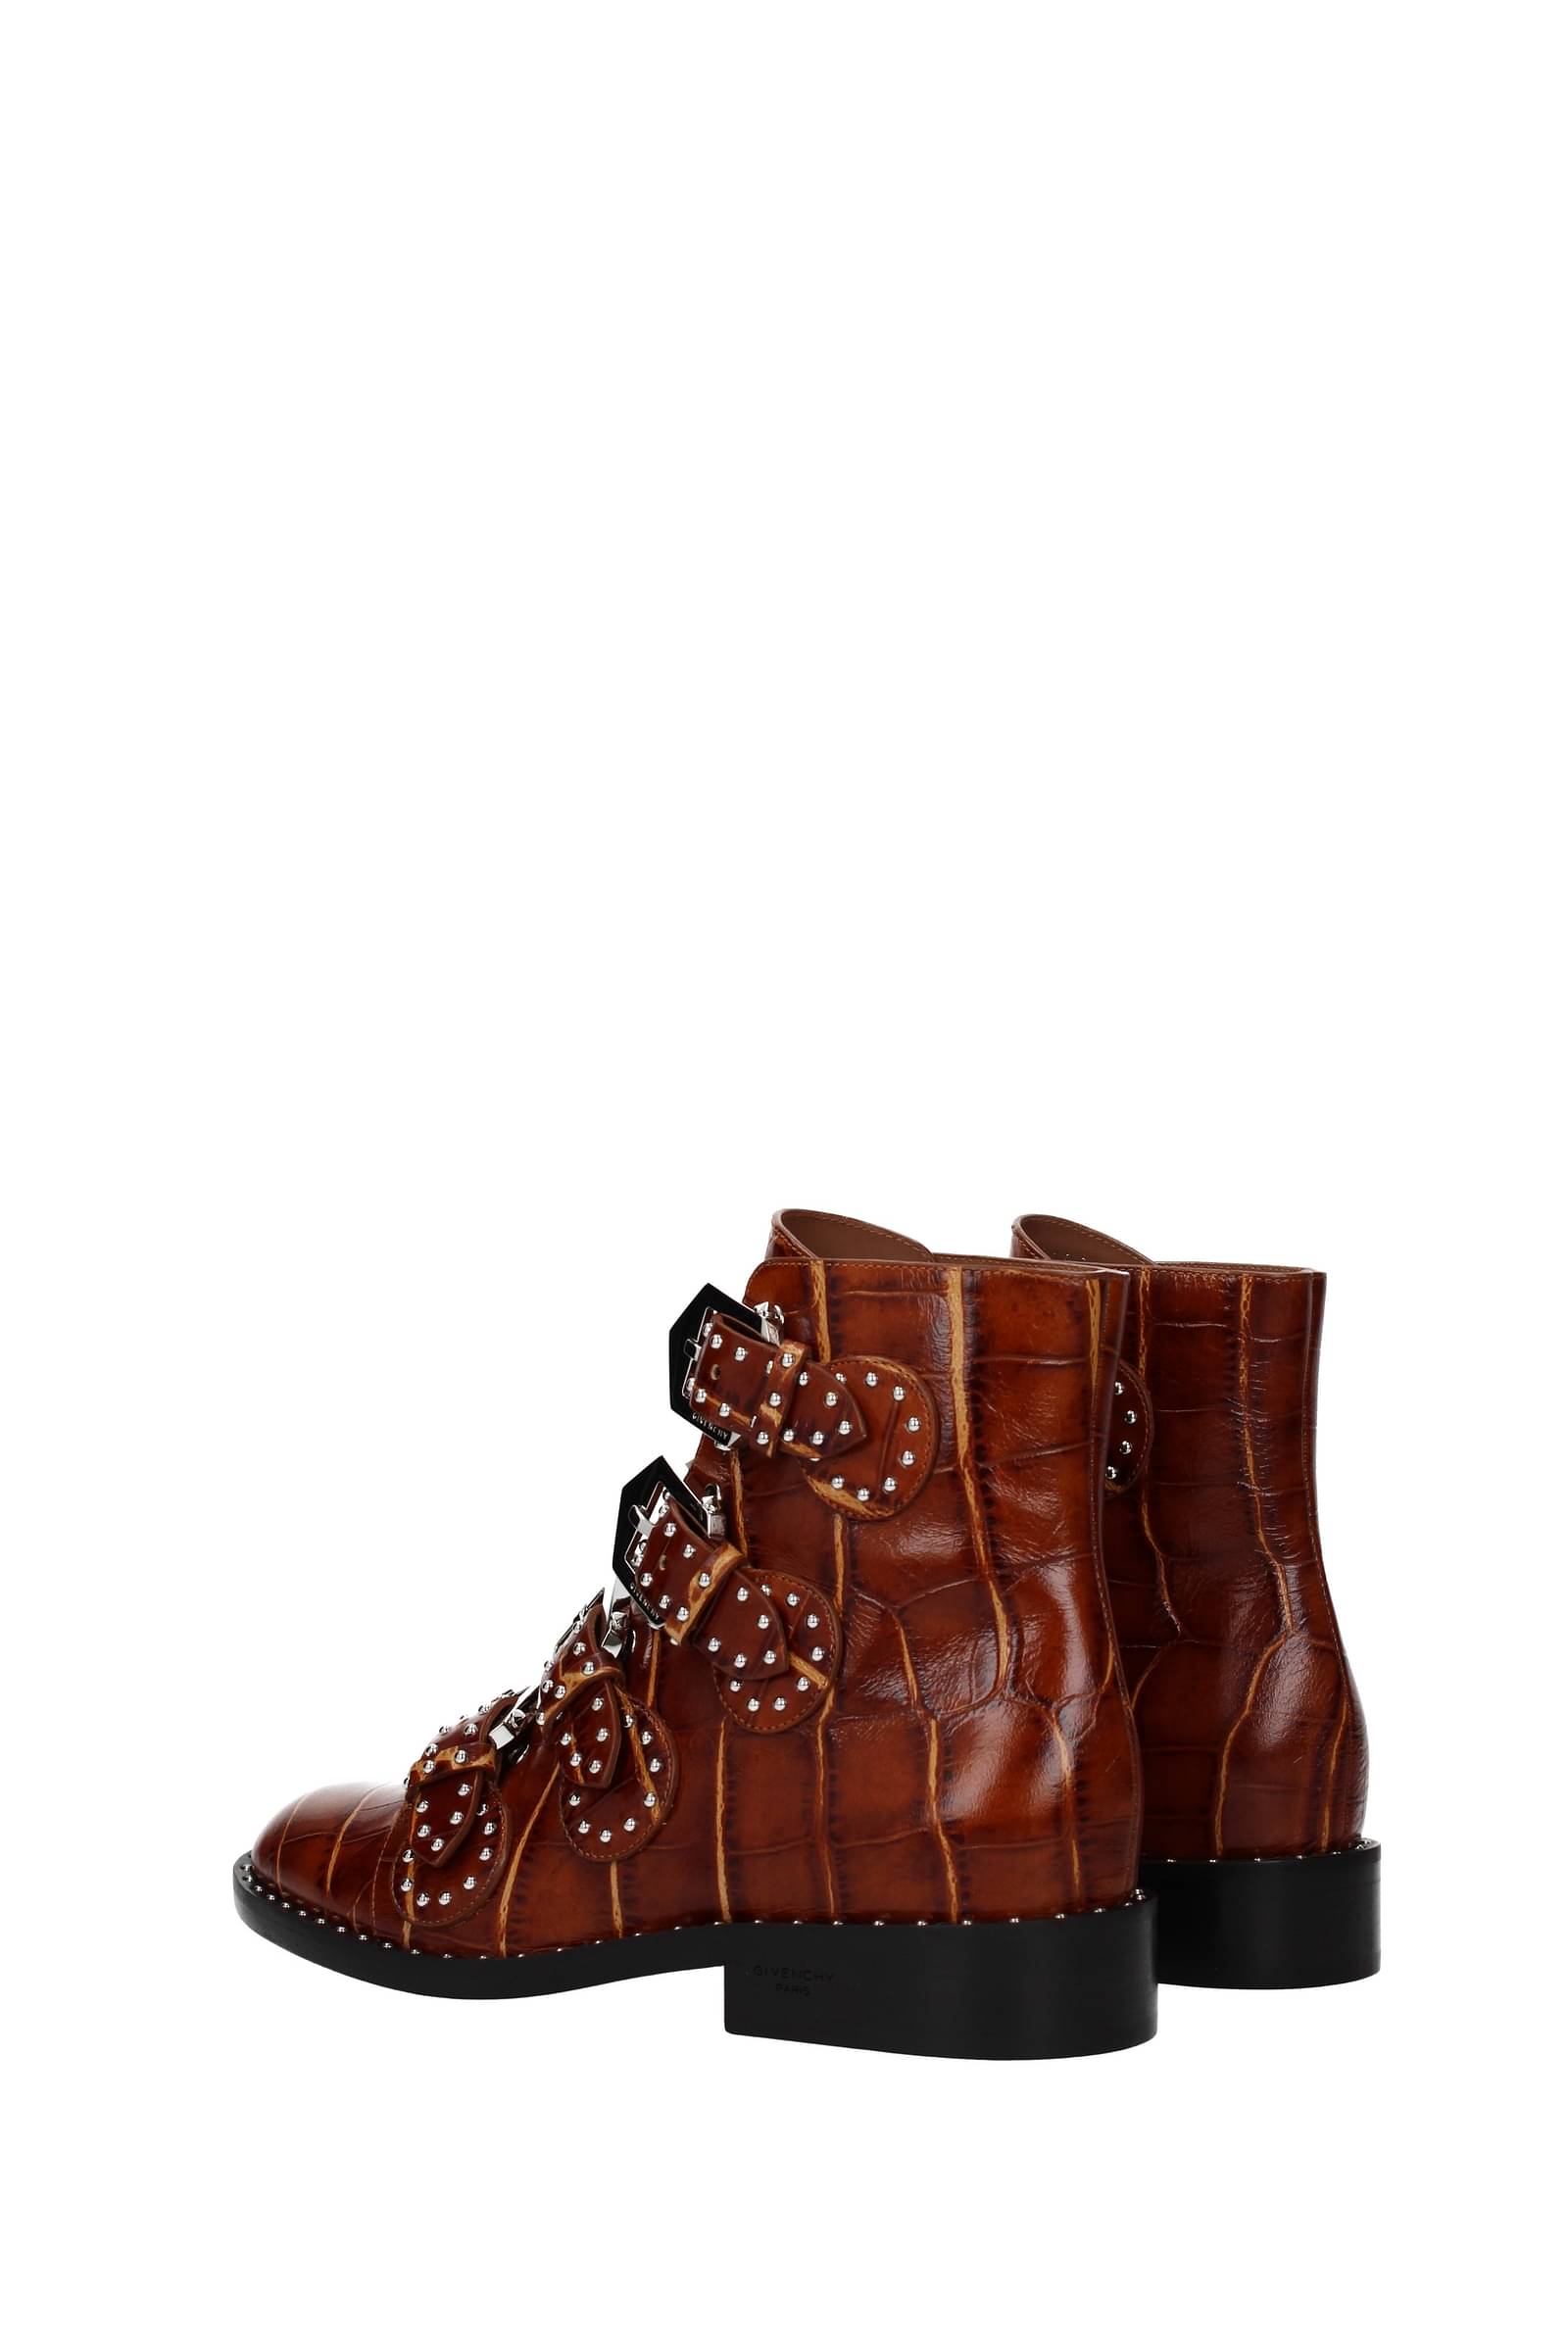 Givenchy Ankle boots Women Leather Crocodile Brown